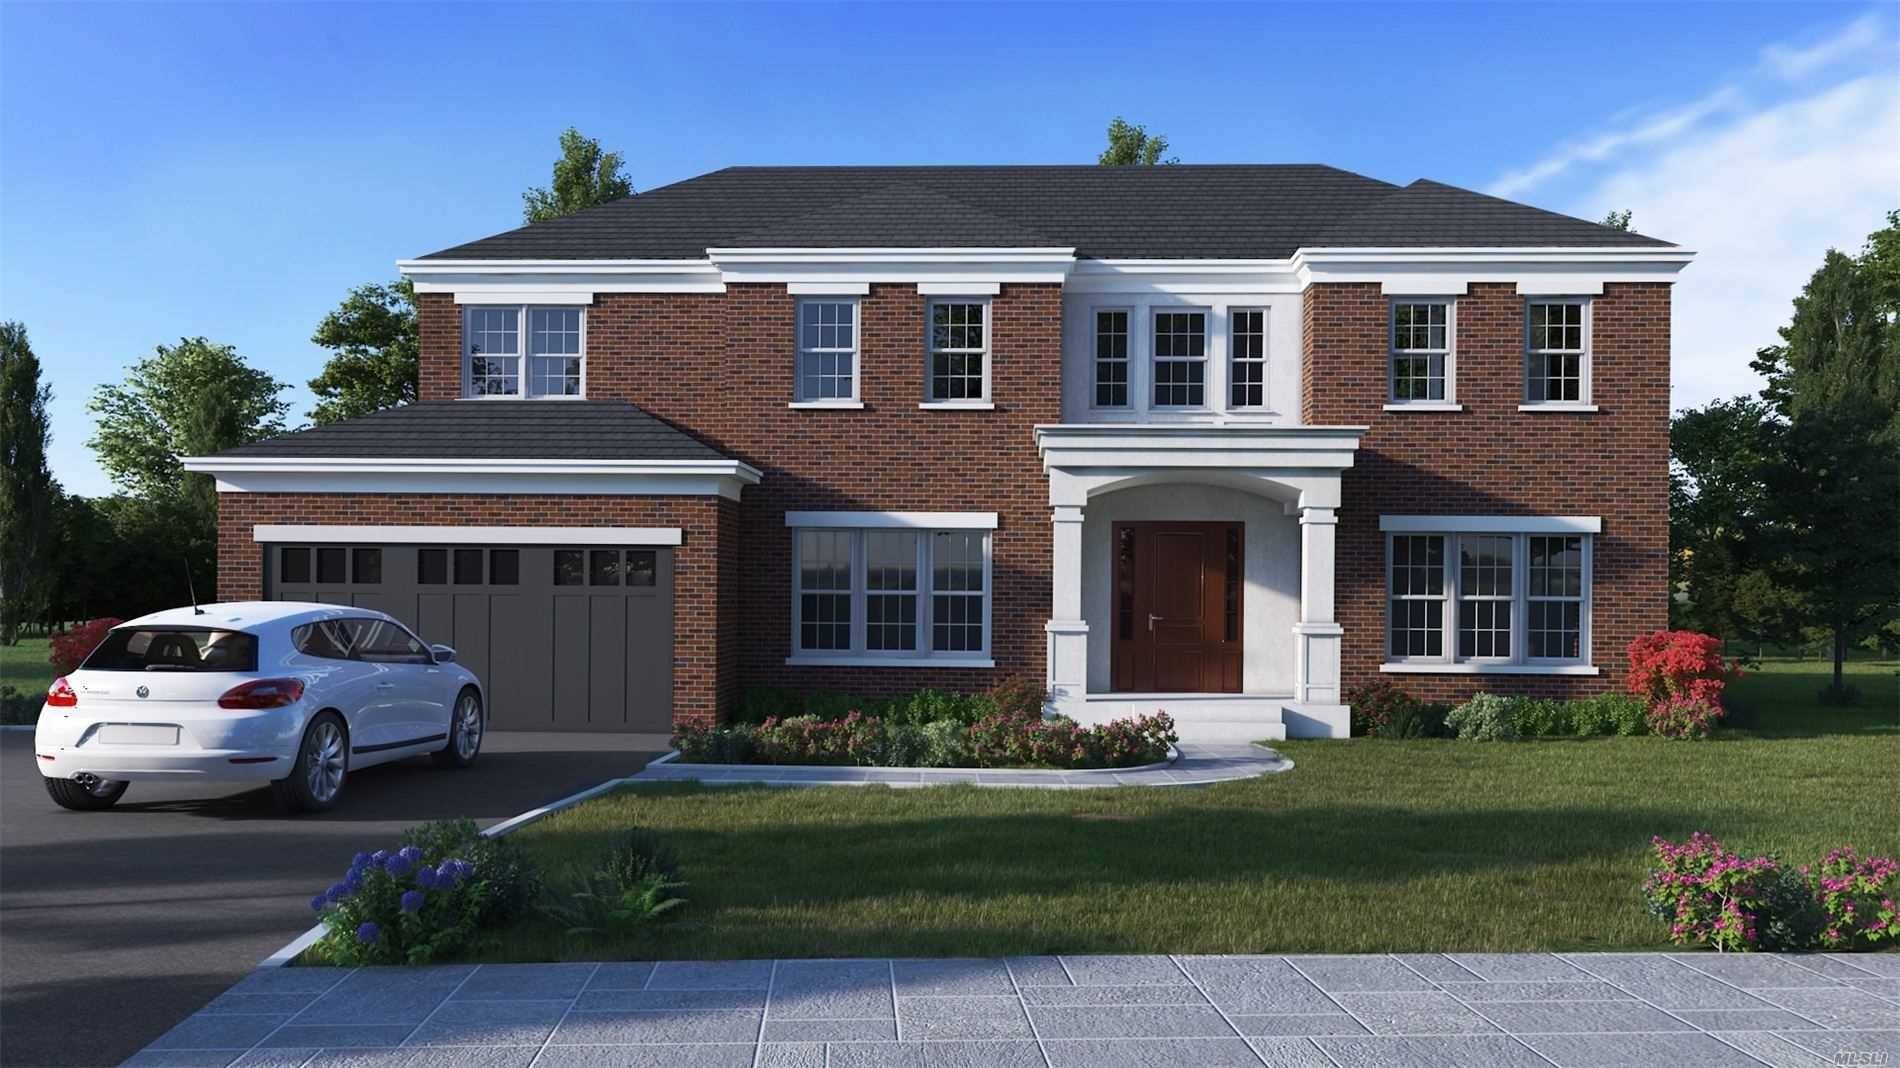 UNIQUE OPPORTUNITY TO WORK WITH BUILDER TO DESIGN AND CUSTOM BUILD 5 6 BEDROOM HOME N STRATHMORE VILLAGE OFFERING 4610 SQ FT OF LUXURY PLUS FINISHED LOWER LEVEL.